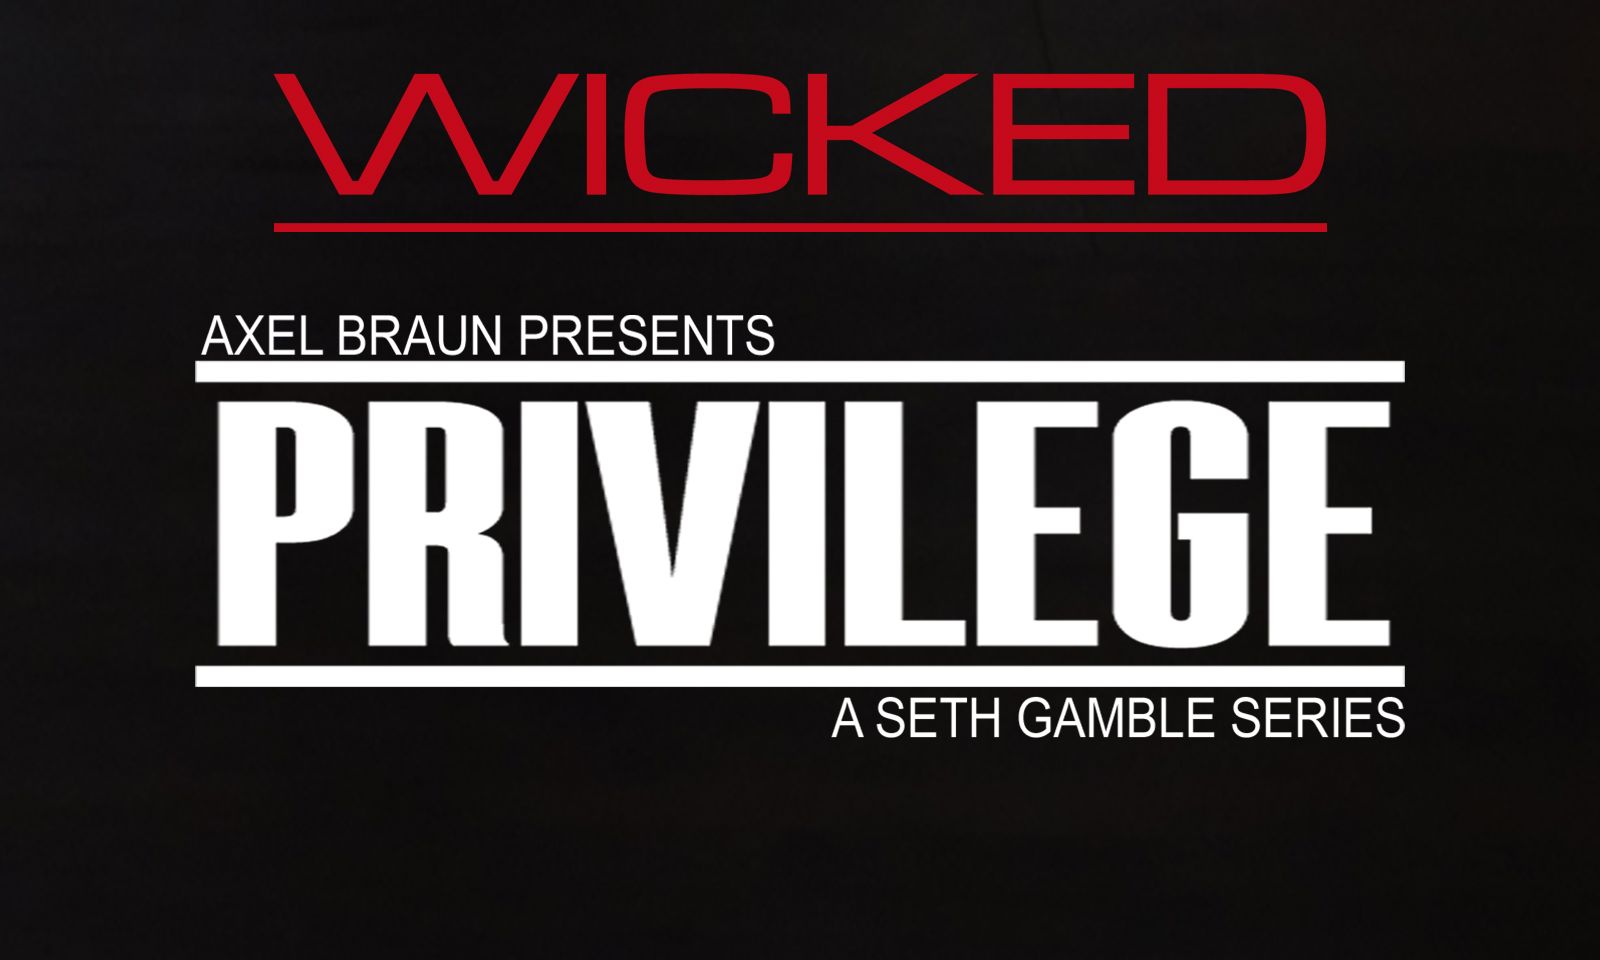 Third Episode of Gamble's 'Privilege' Debuts on Wicked.com